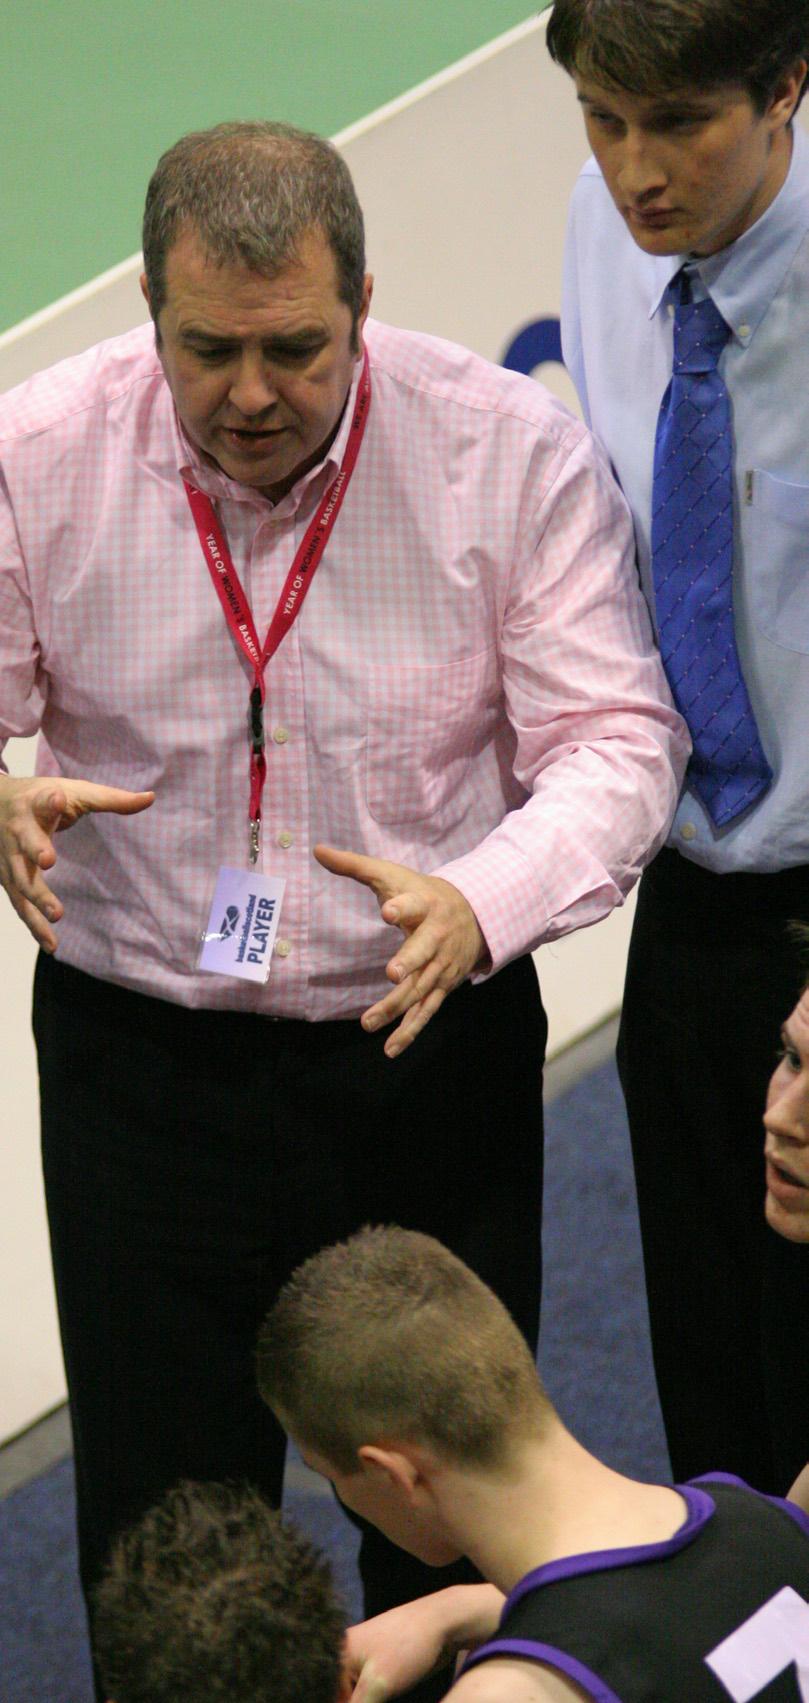 Prior to this Doug was the Scotland U16 Men s Head Coach from 2005 until 2009 with his team taking a Gold medal at the 2008 FIBA Europe Division C Championship and Silver in 2006.